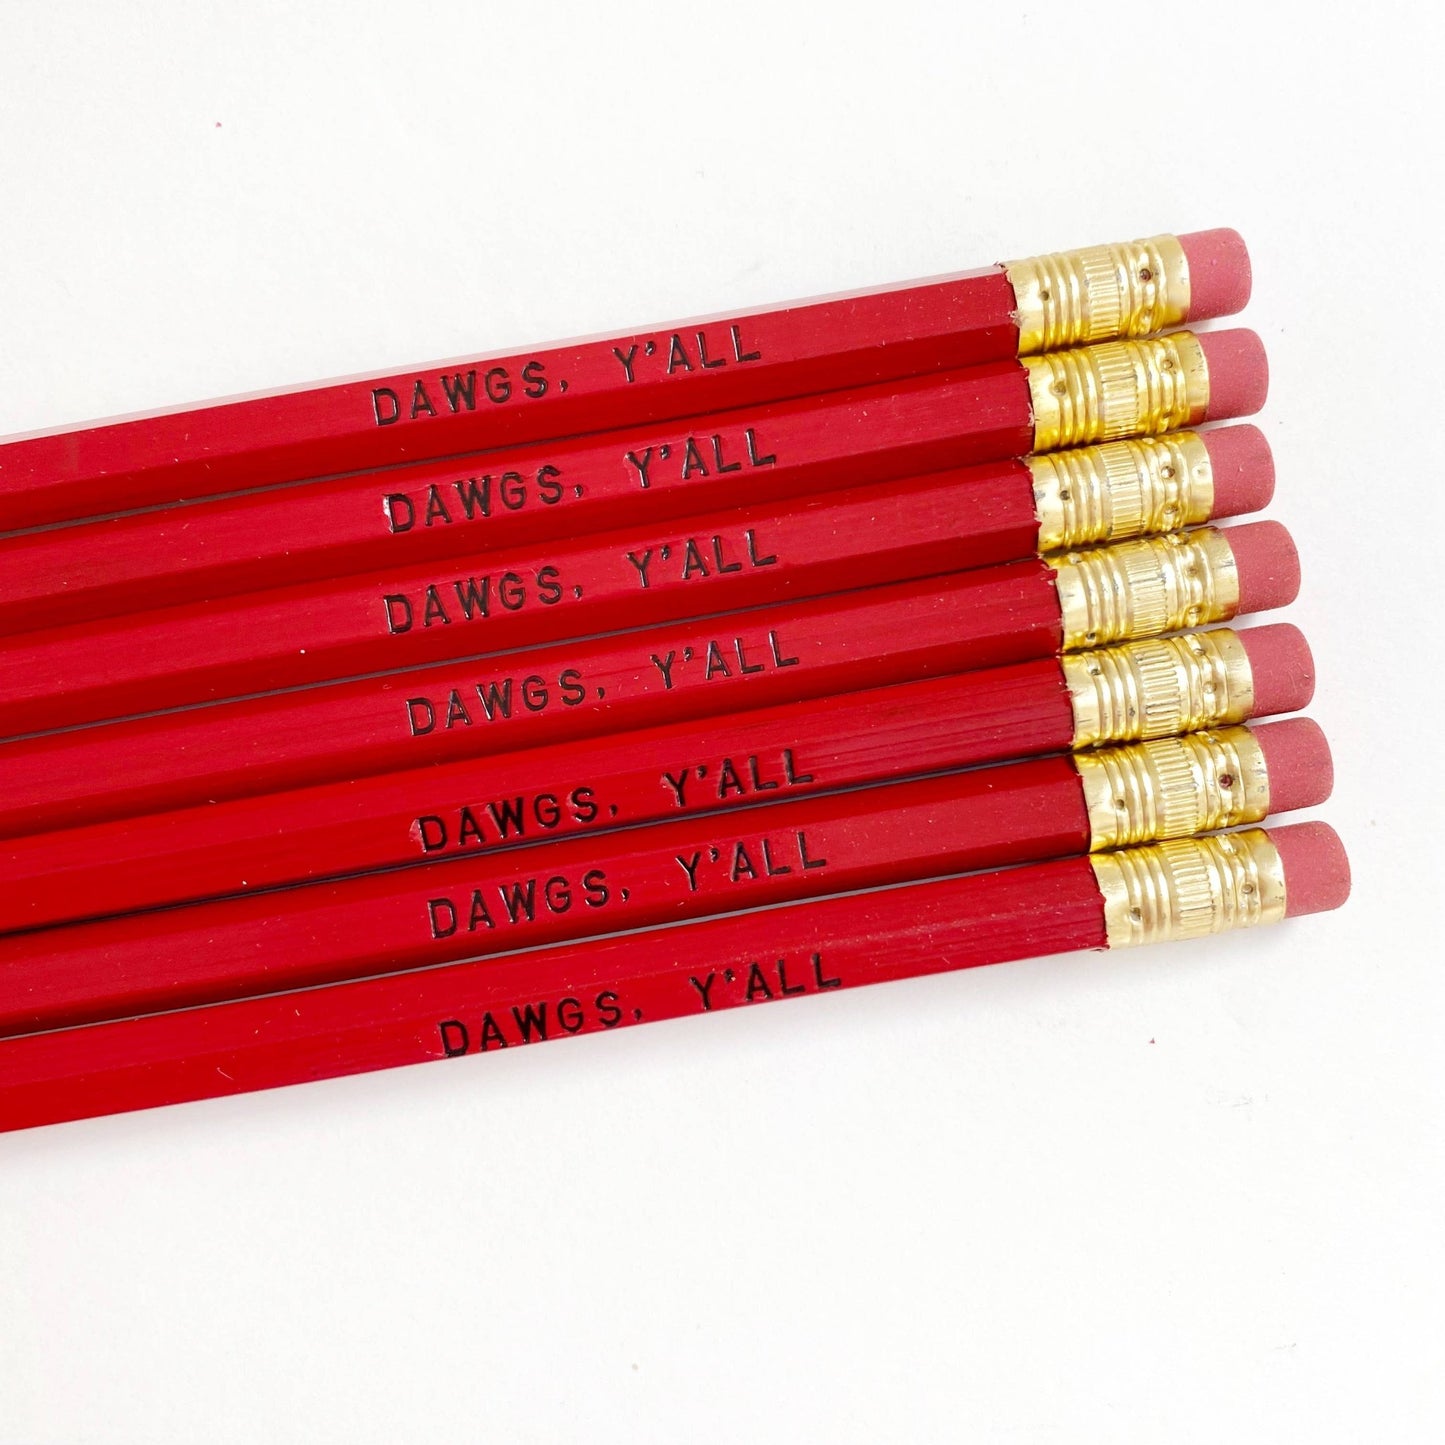 Dawgs Y'all Pencils - [ash-ling] Booksellers